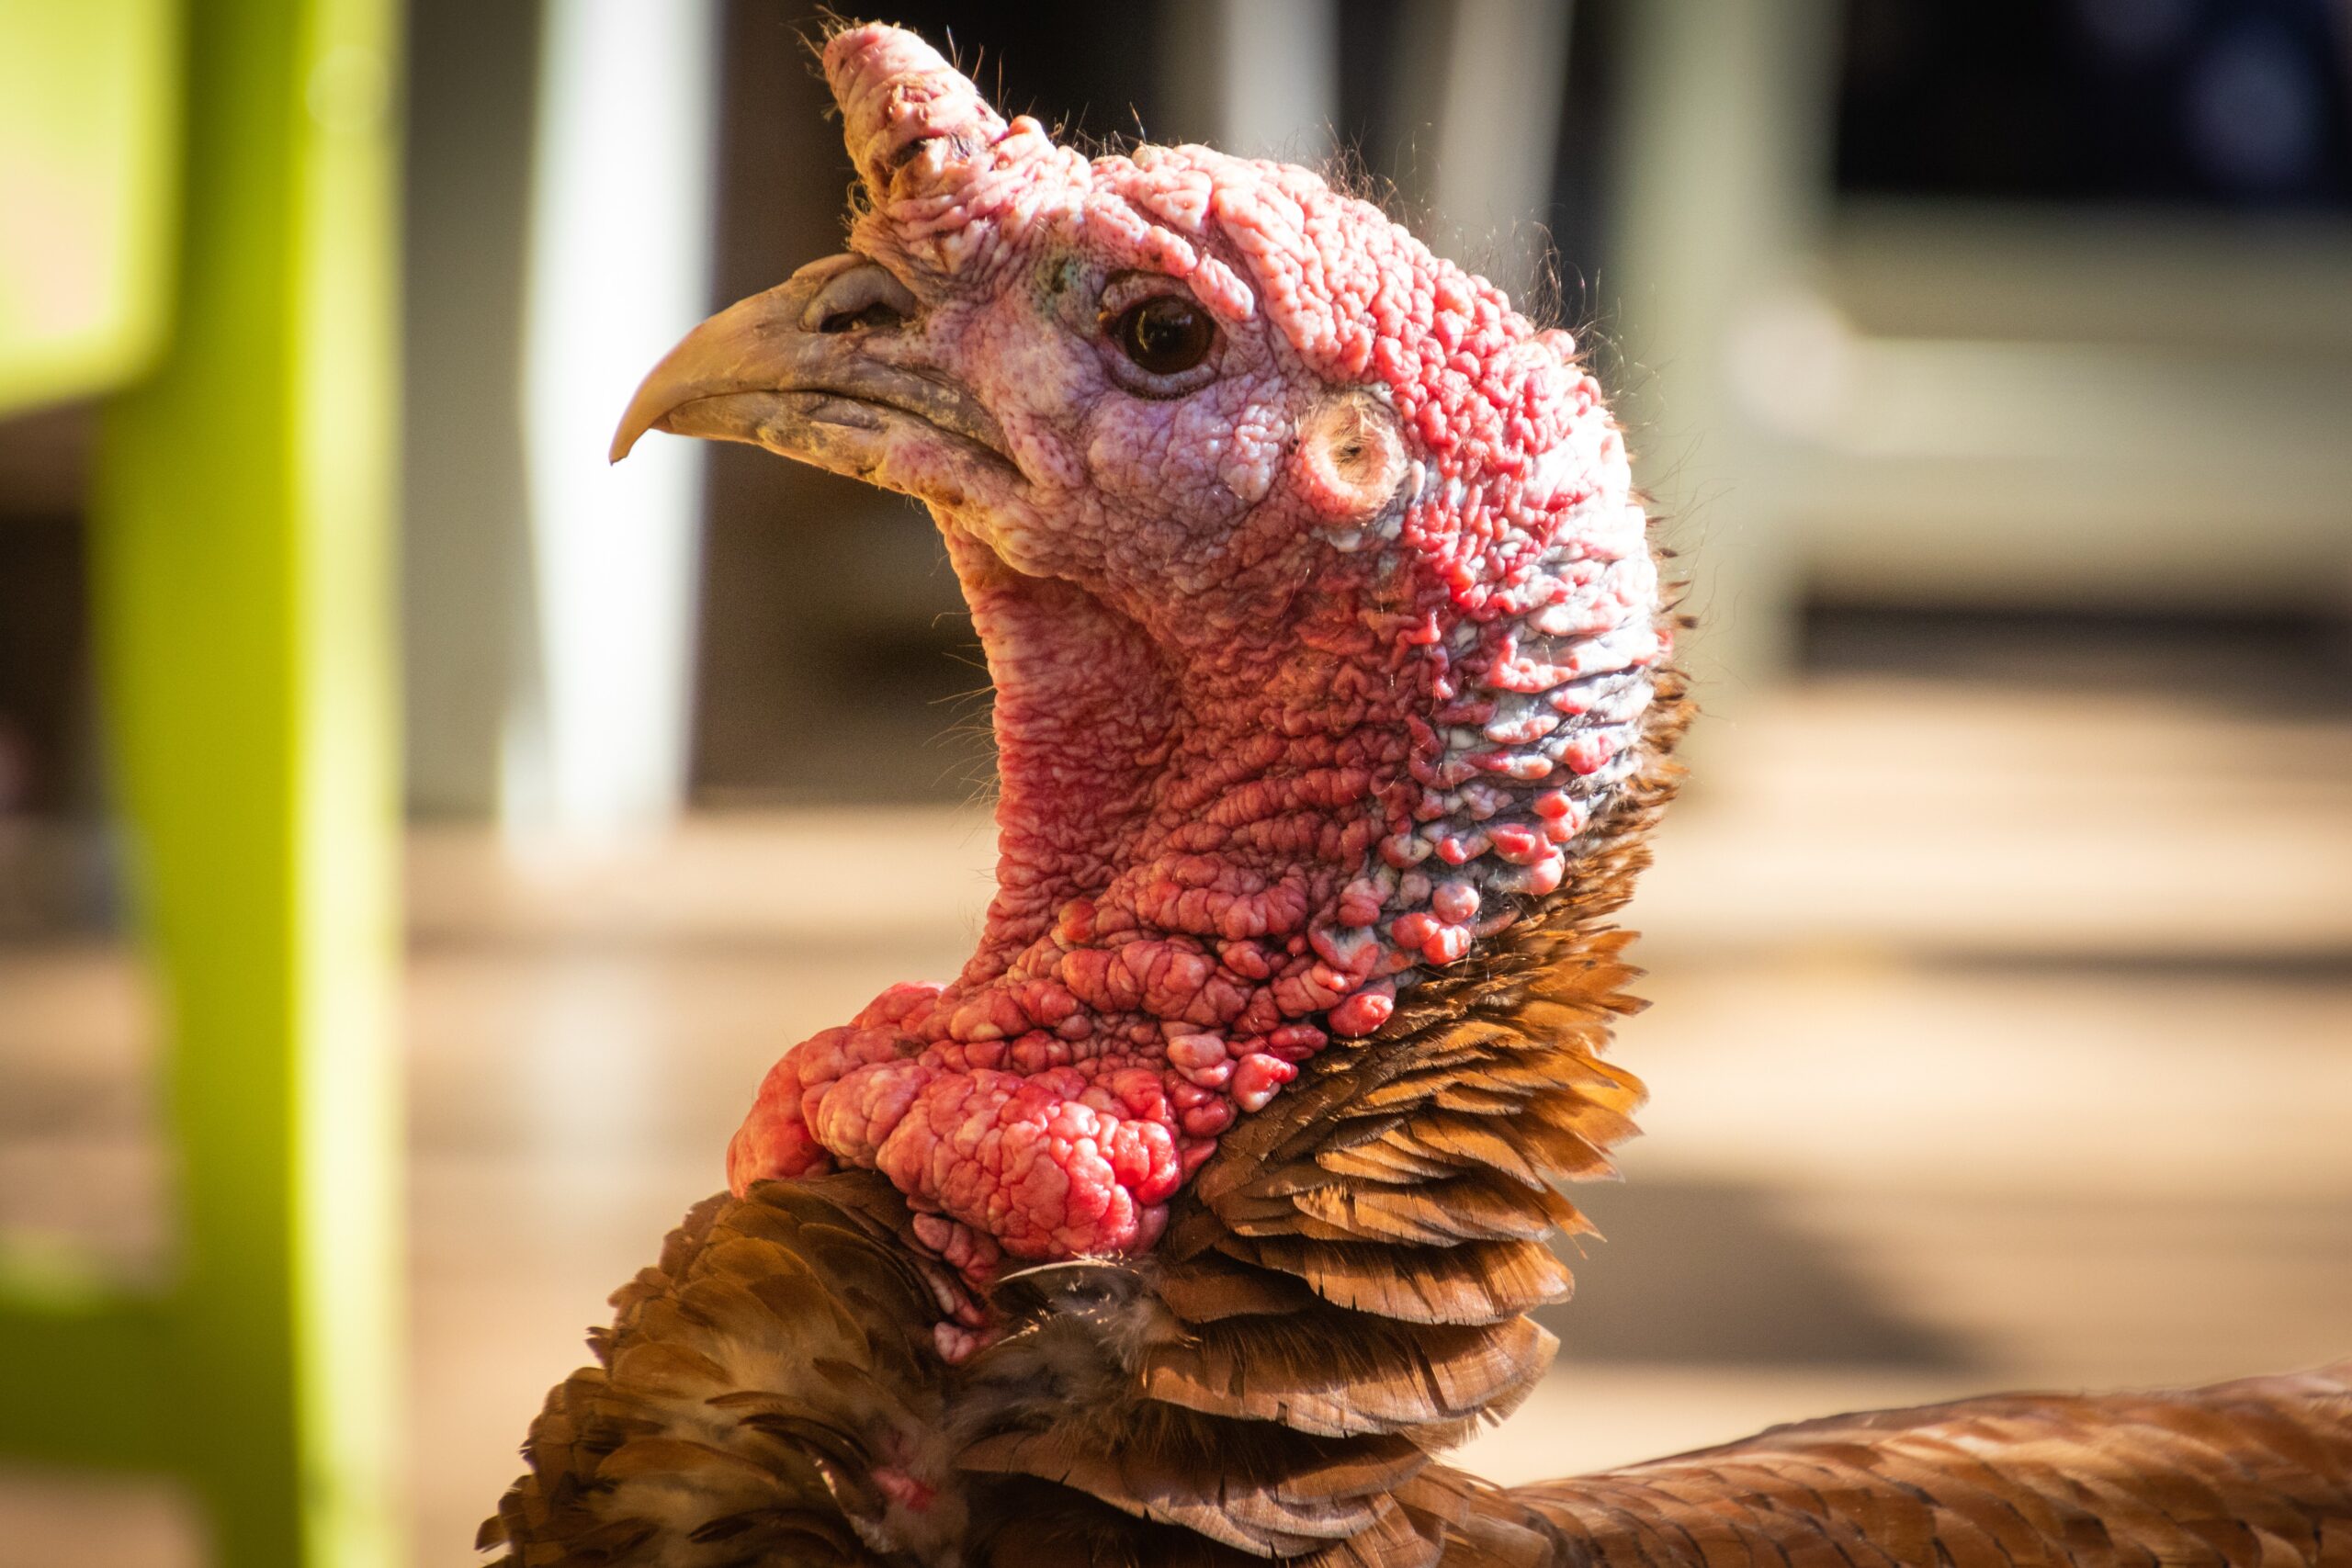 Turkey and chicken poop have untapped energy potential